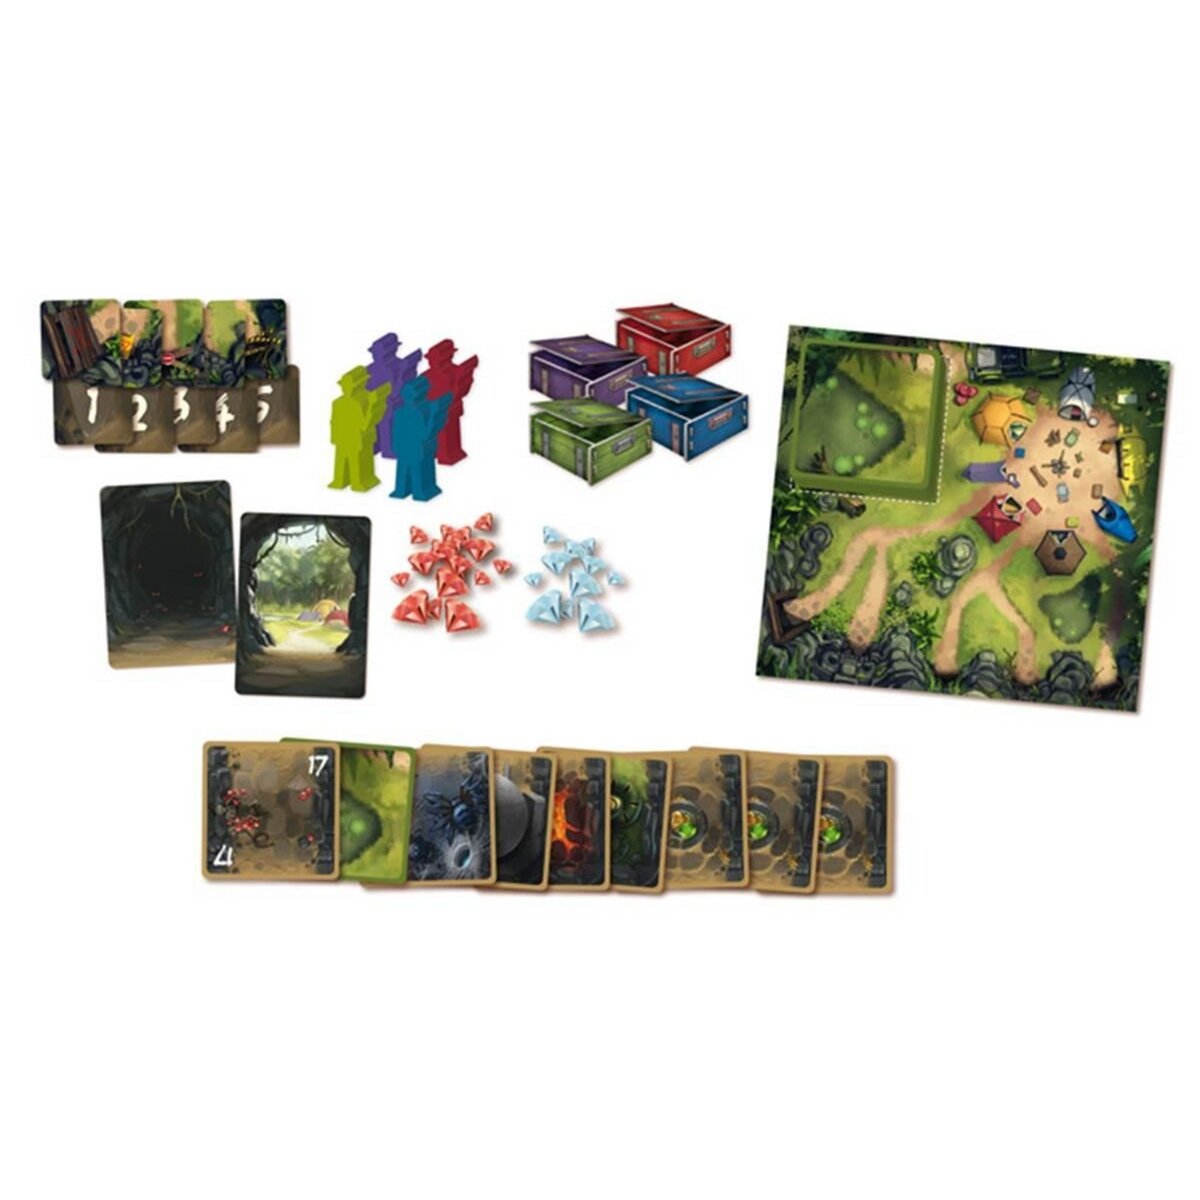 Jeu d'ambiance Pixie Games Call Me Cthulhu pas cher 